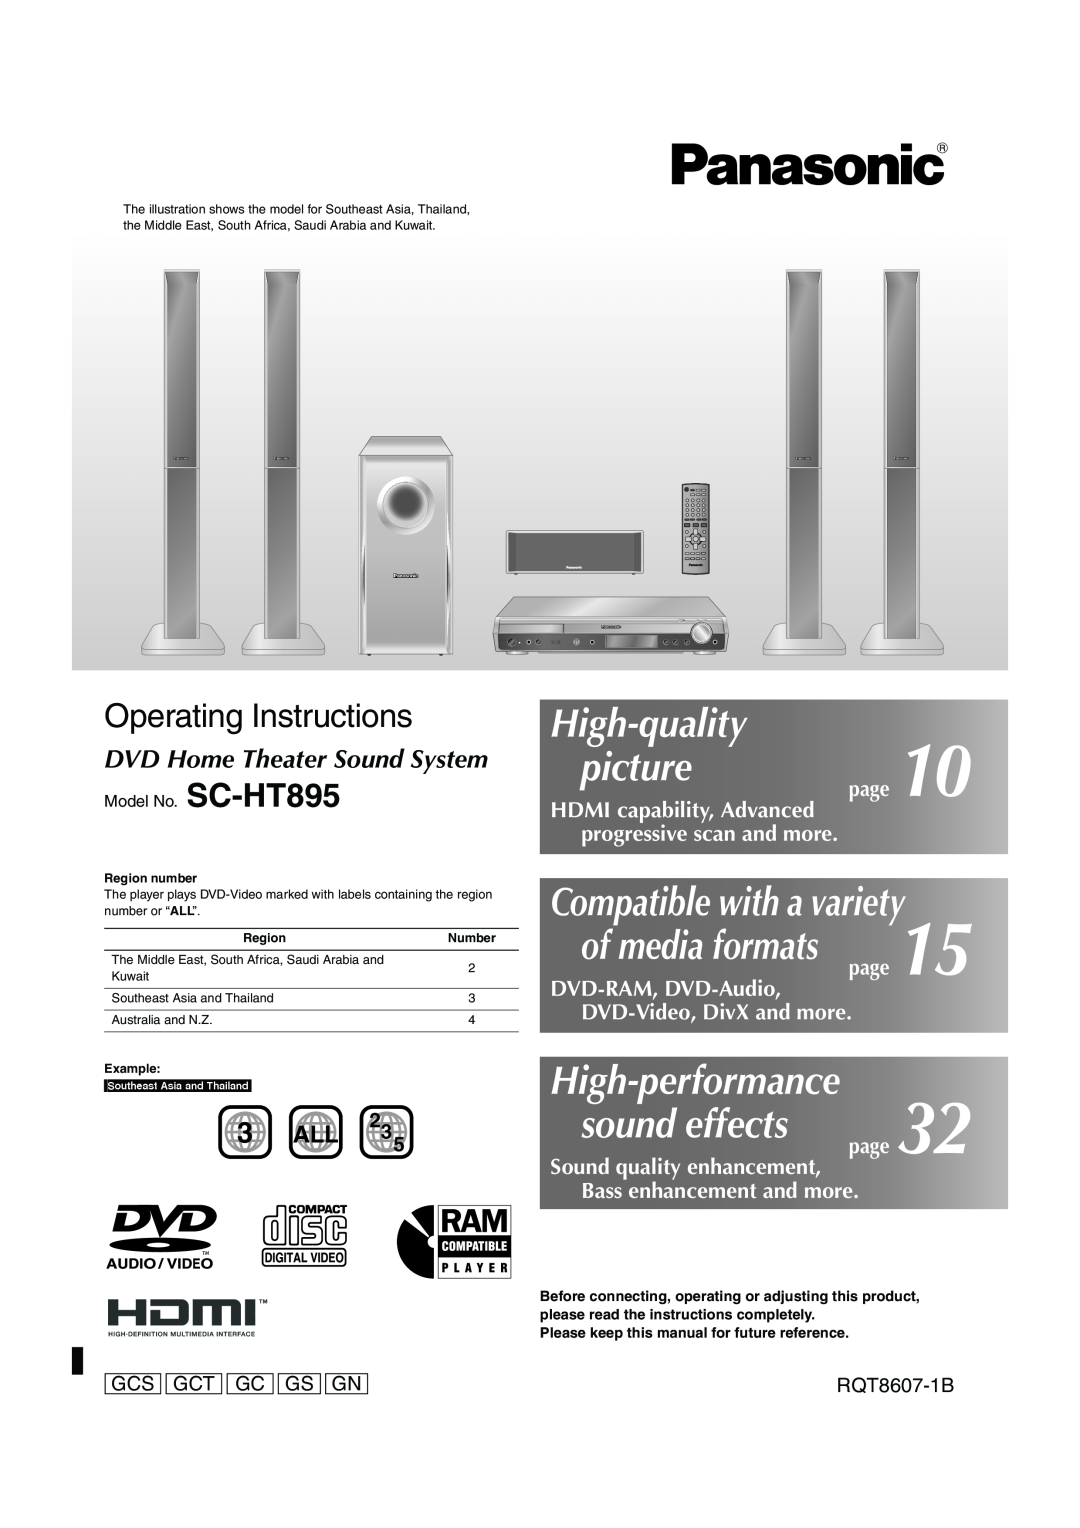 Panasonic SC-HT895 manual DVD Home Theater Sound System, High-quality picture, High-performance sound effects, 3 ALL, page 